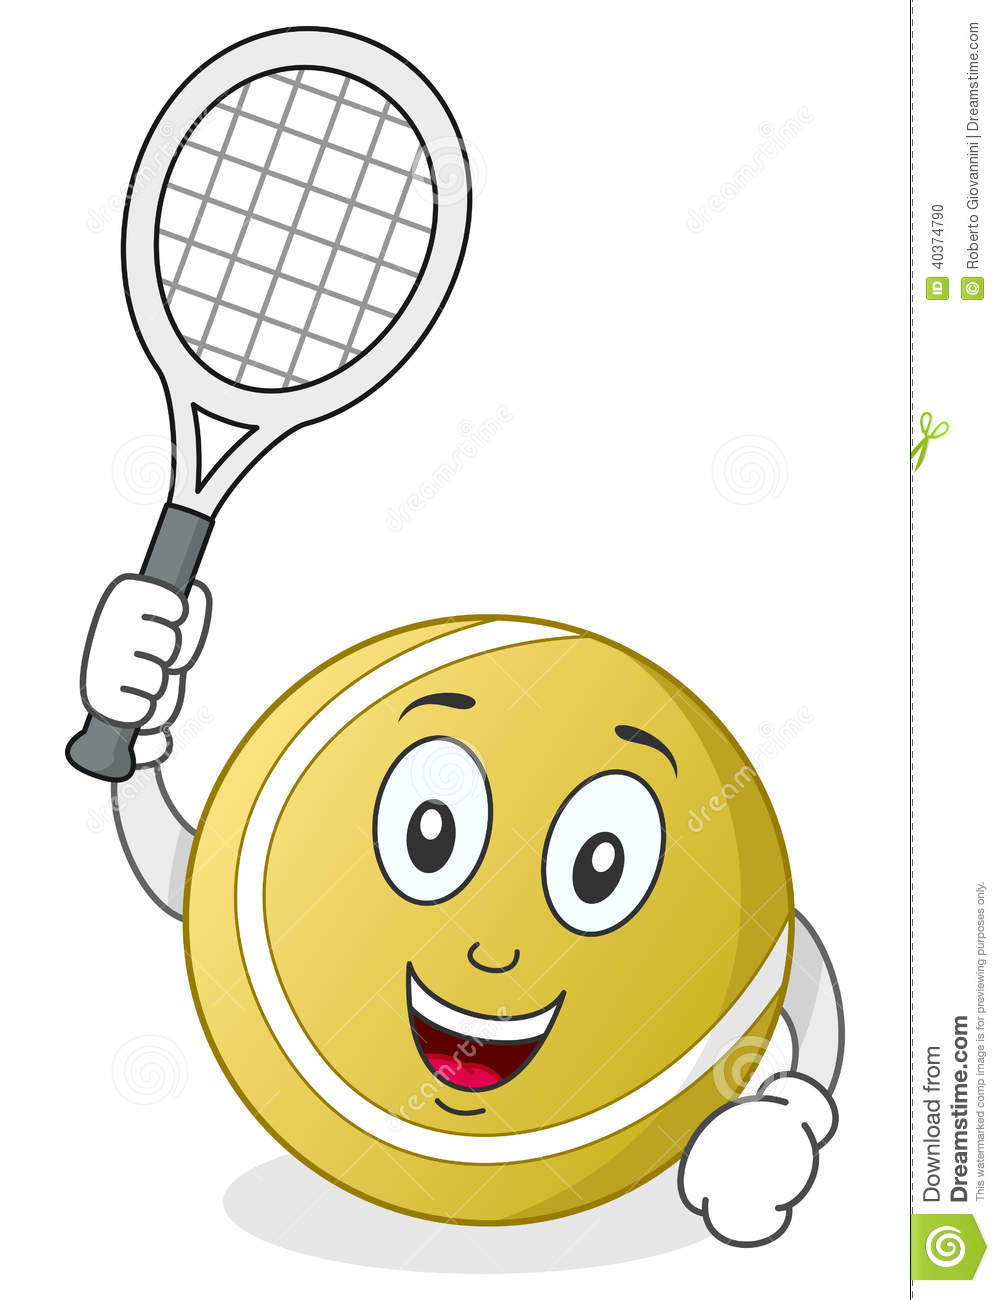 funny tennis clipart - photo #13